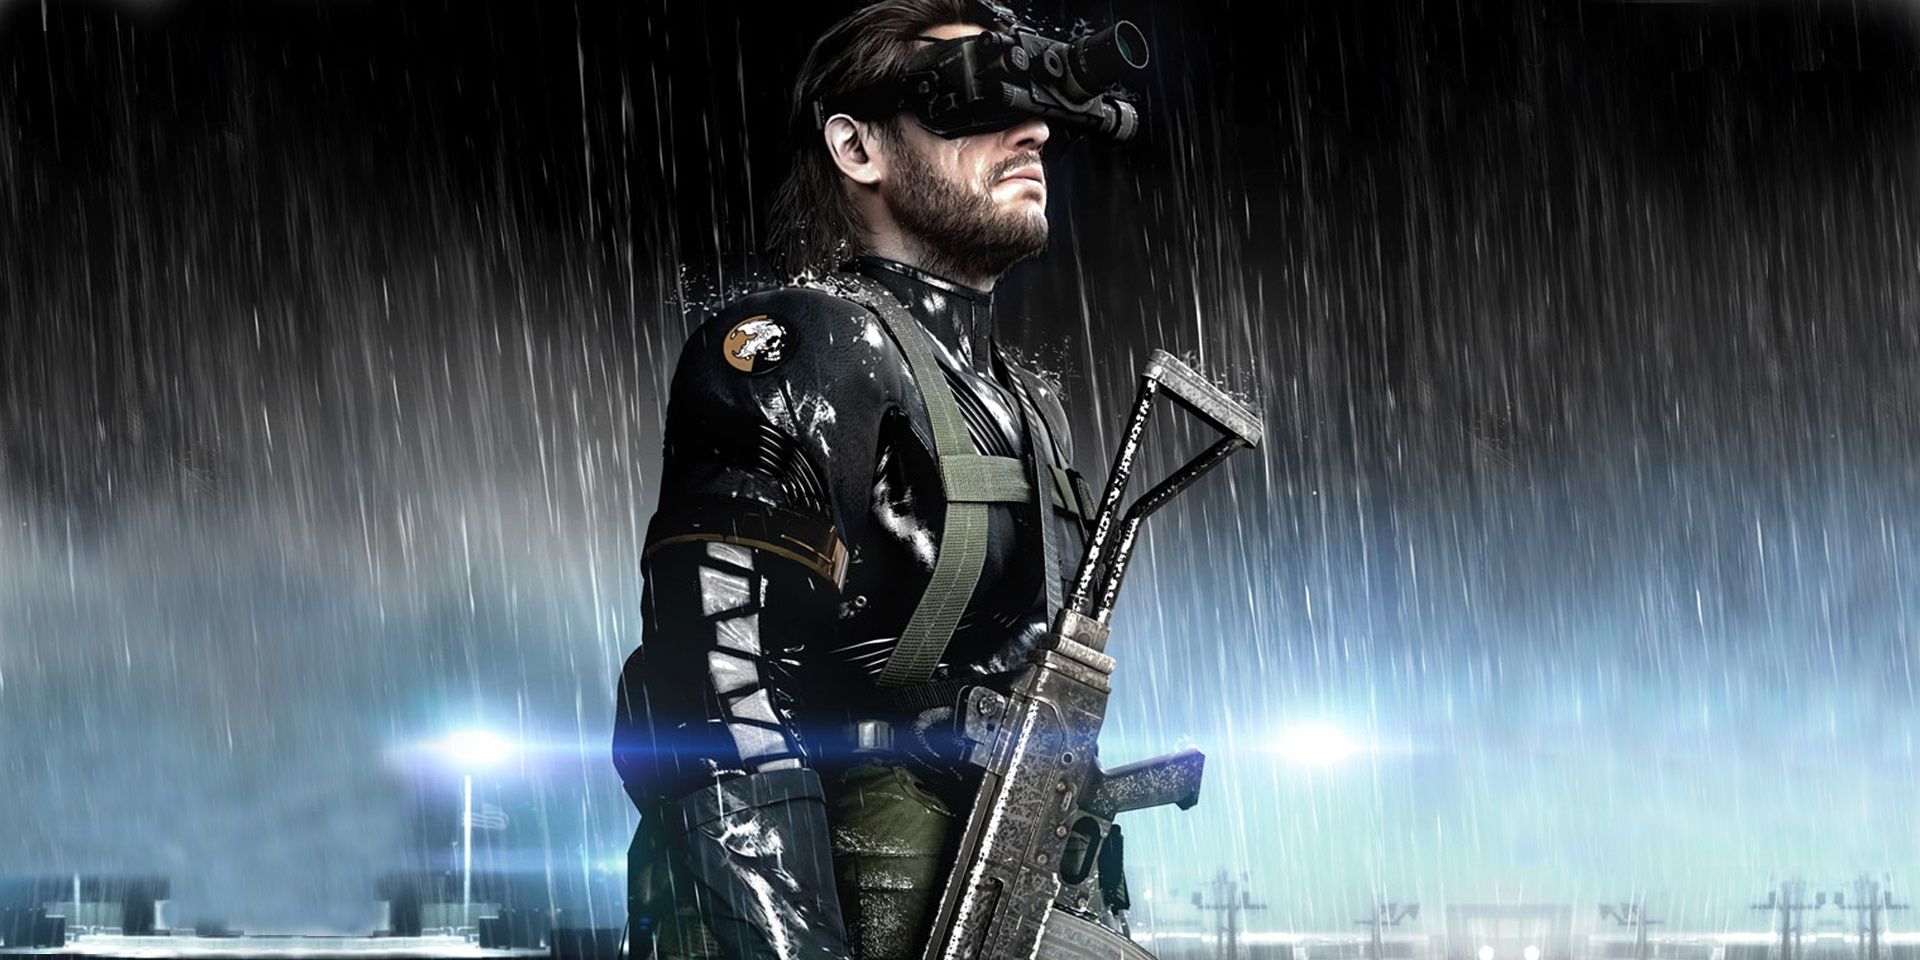 metal gear solid 10 video game movies stuck development hell